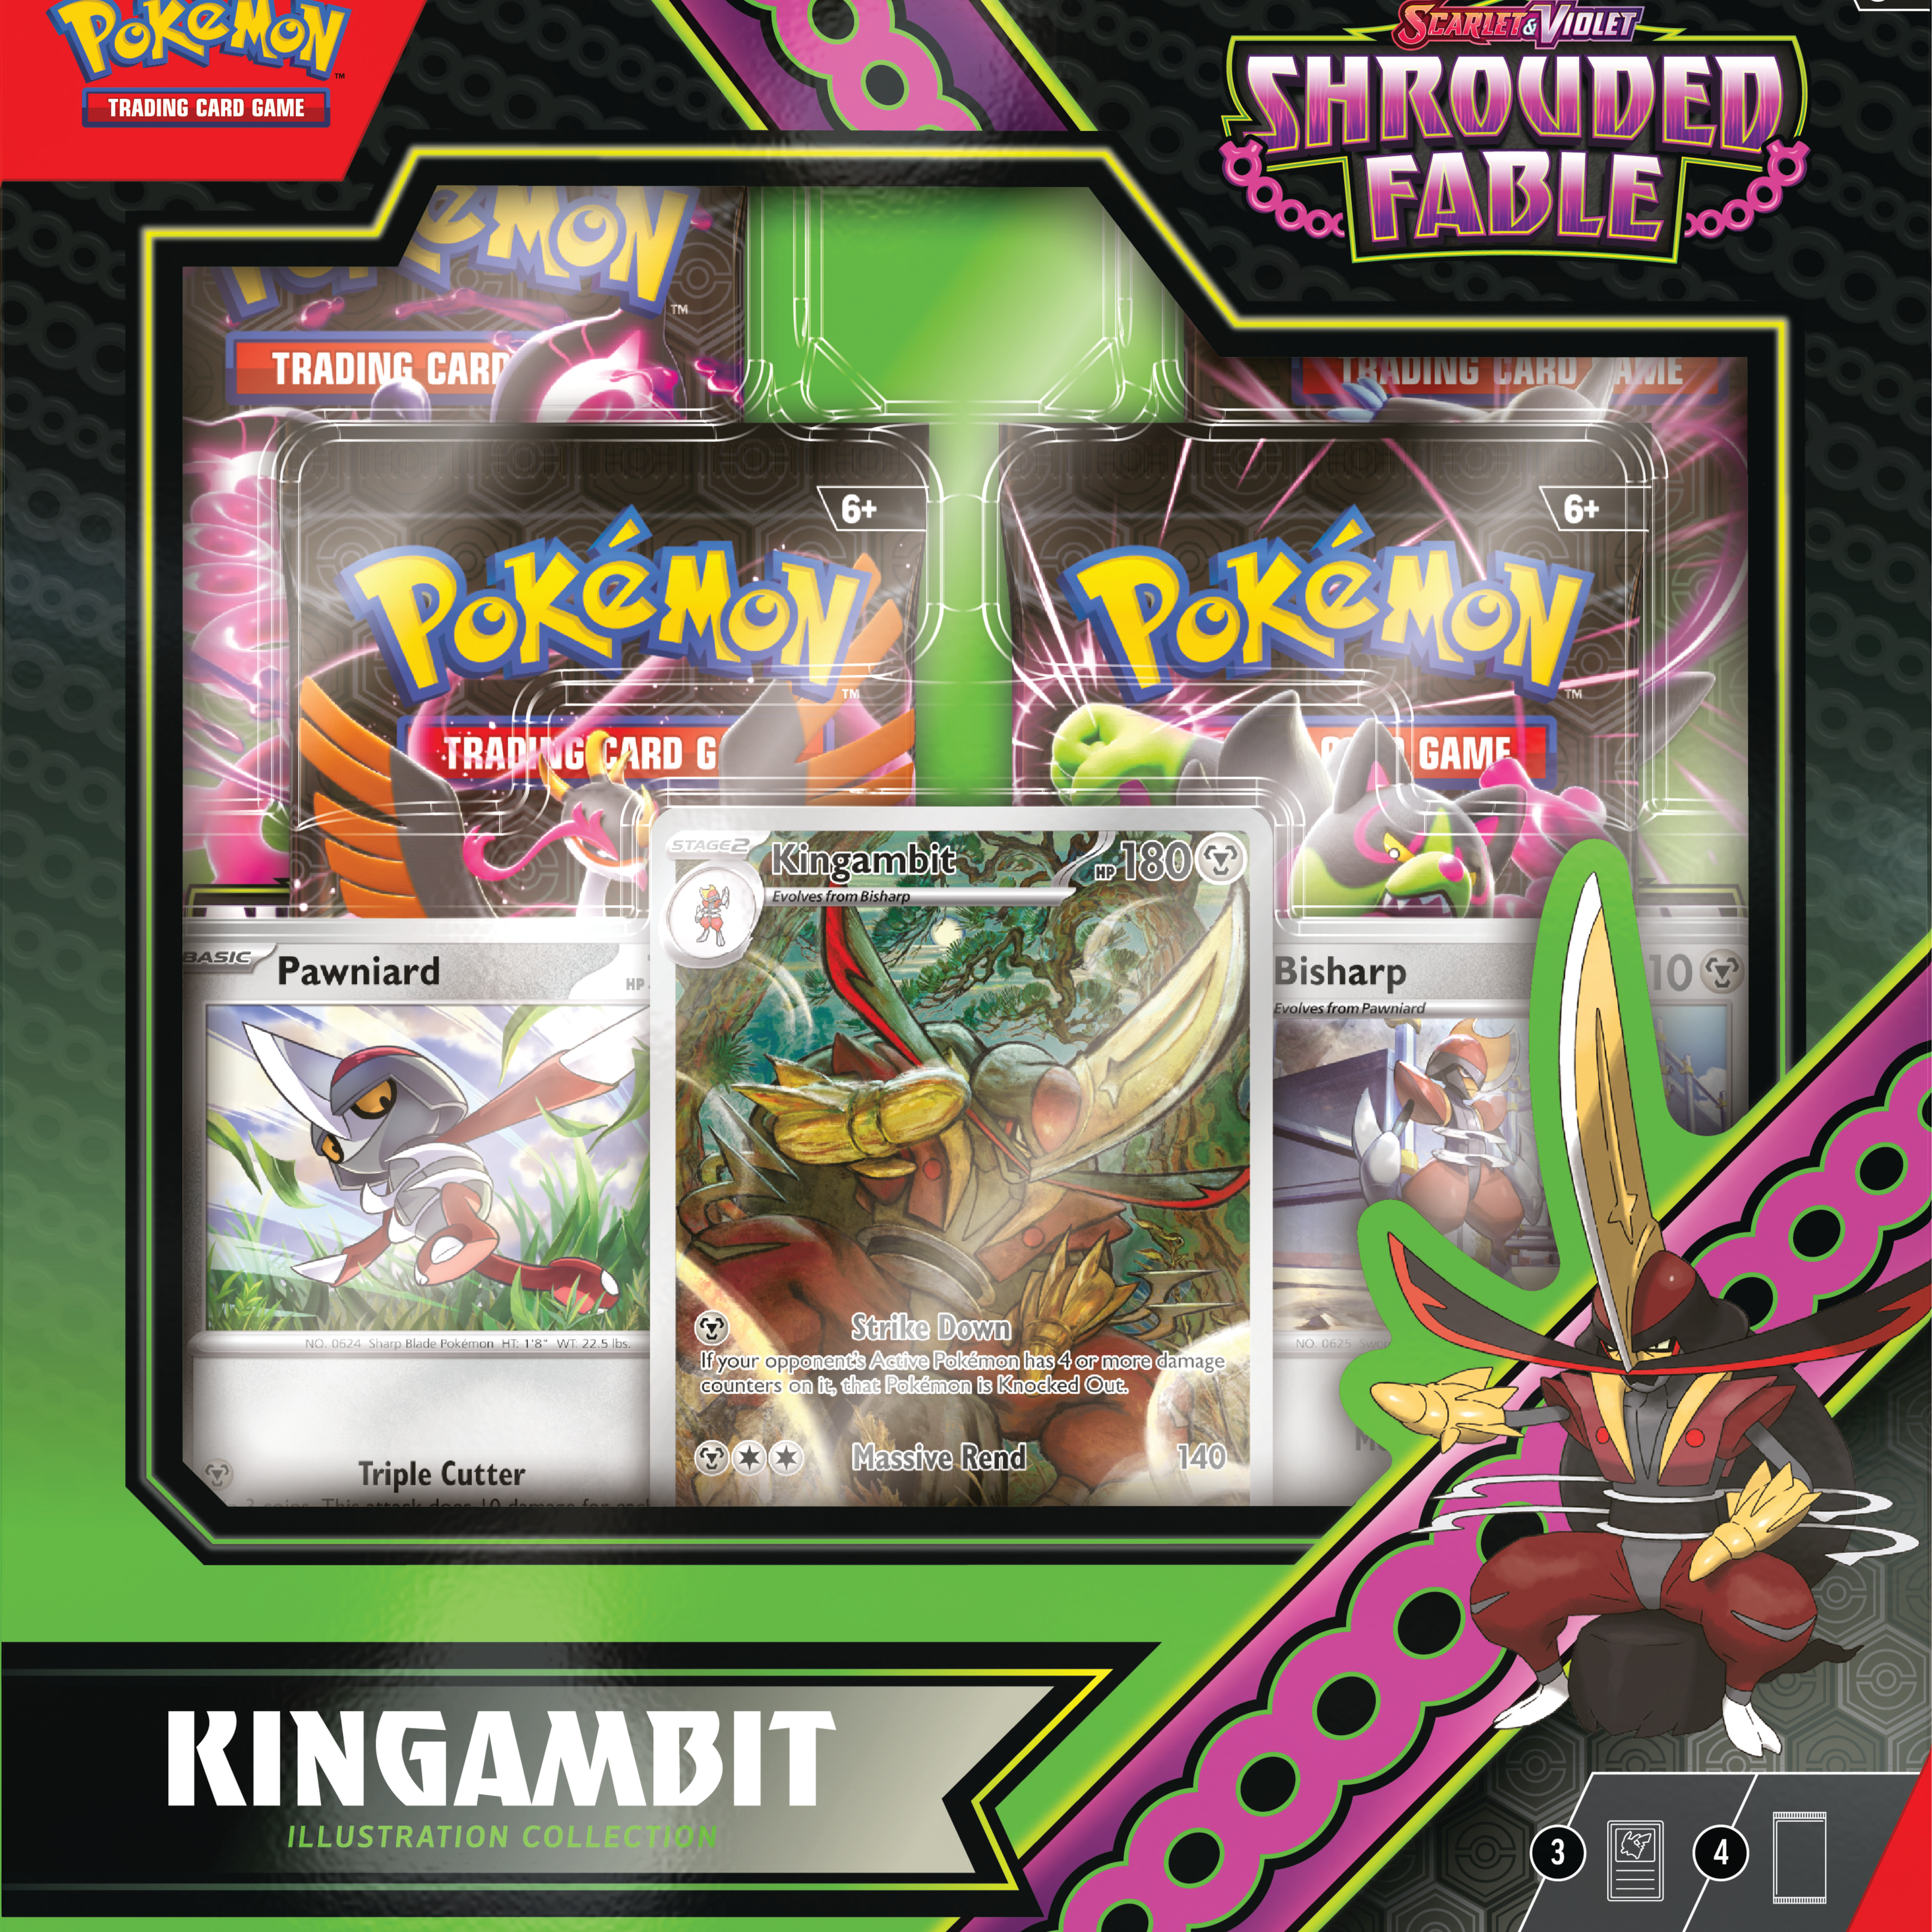 Pokémon TCG: Scarlet and Violet Shrouded Fable Kingambit Illustration Collection